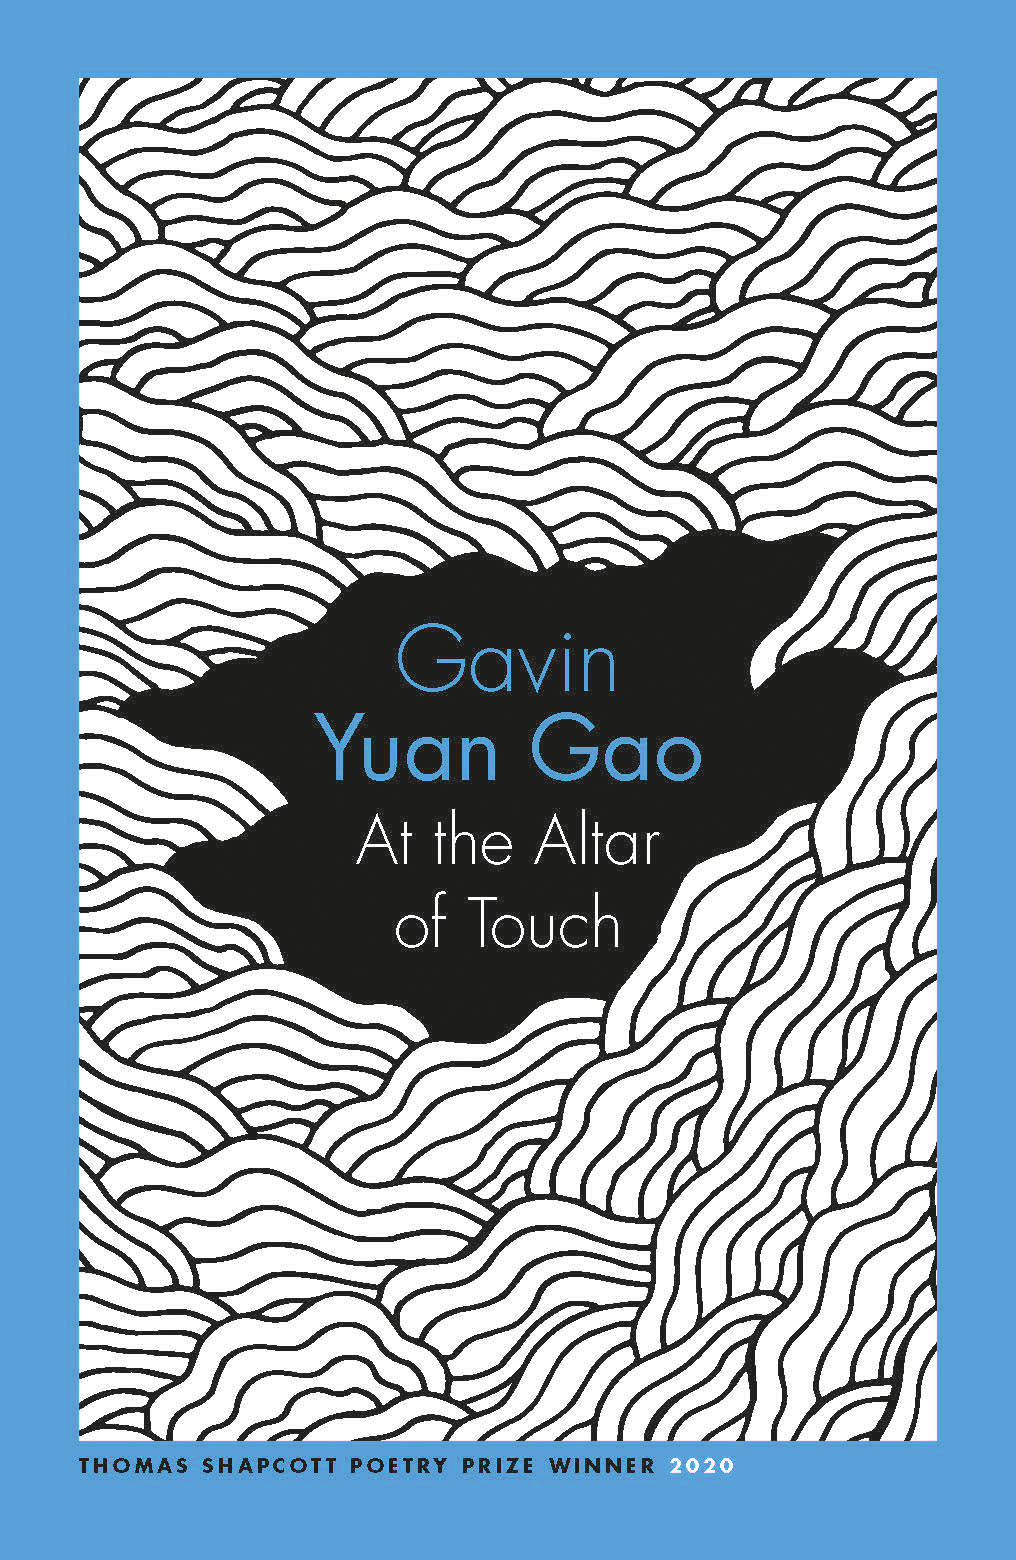 Cover of At the Altar of Touch by Gavin Yuan Gao. The cover shows curved shapes like waves on a blue background.